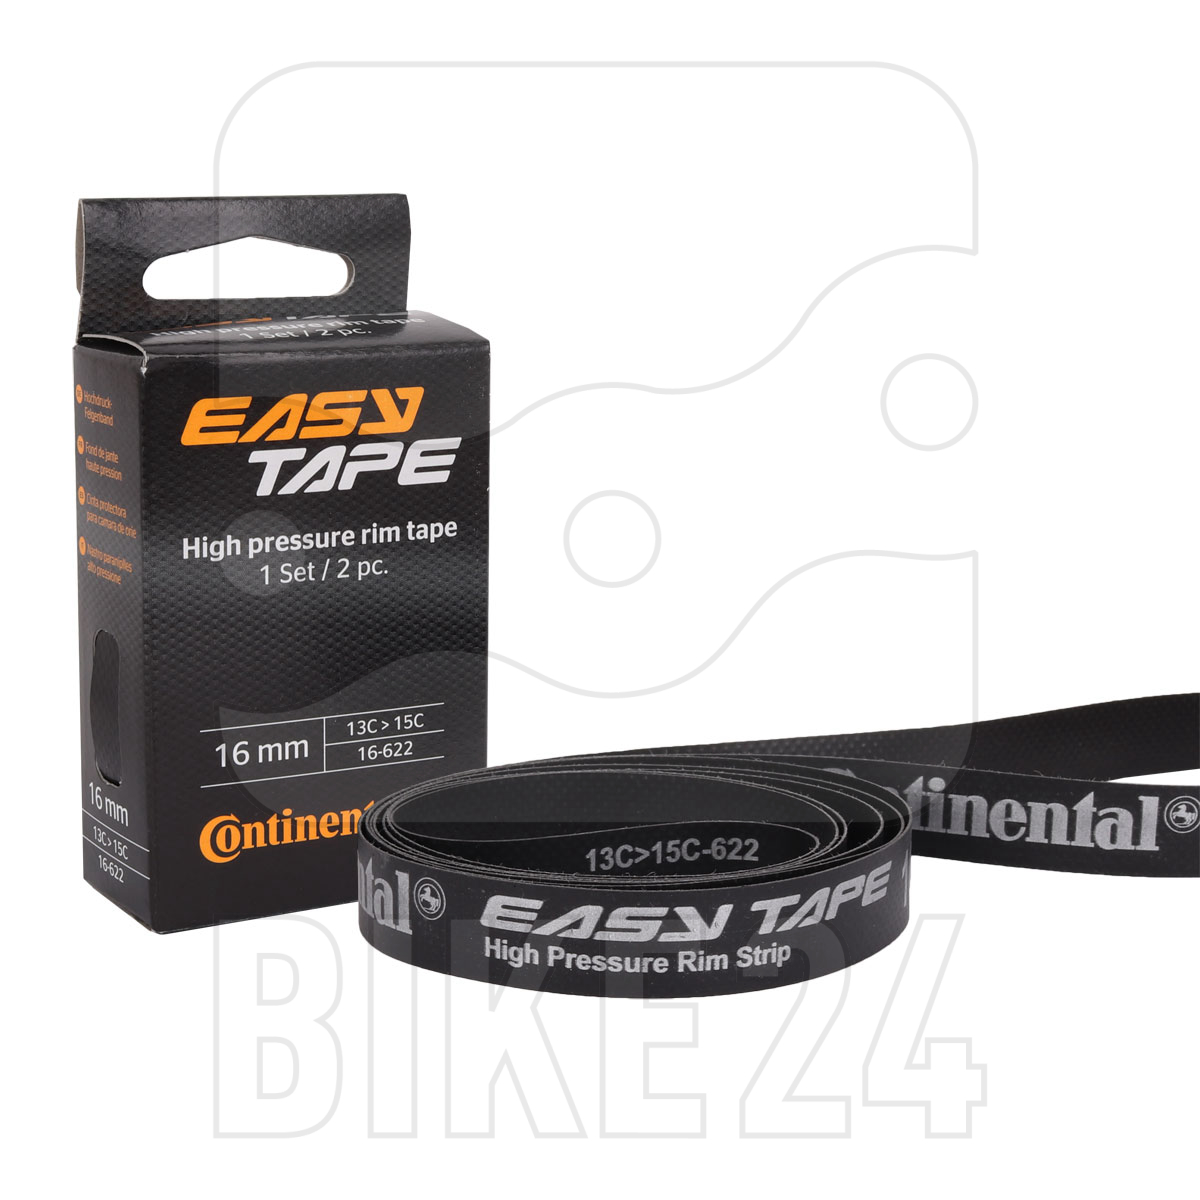 Productfoto van Continental Easy Tape High Pressure Rim Tape up to 15 bar - 2 pieces